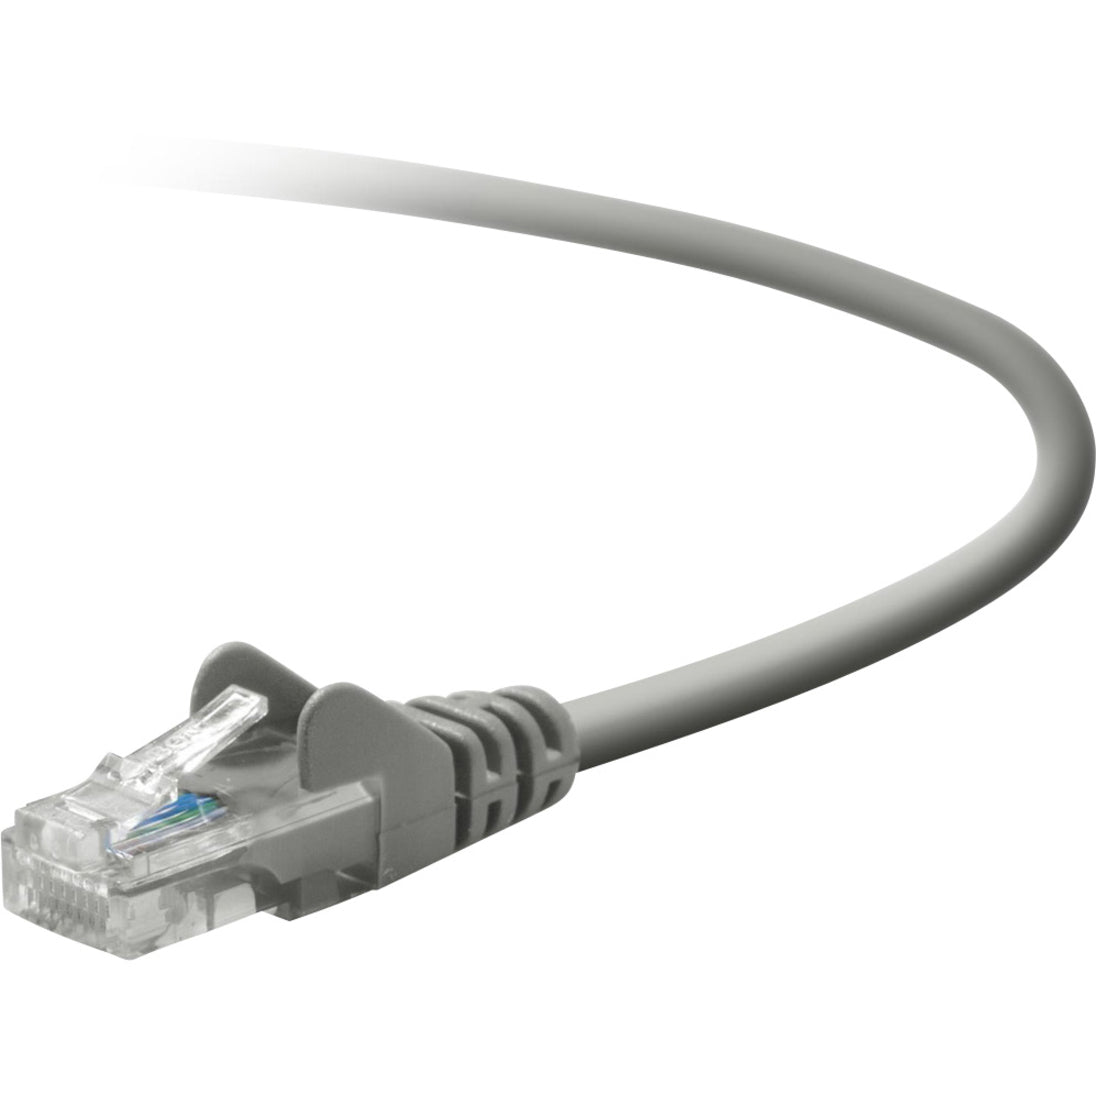 Belkin A3L791B25-S Cat. 5E UTP Patch Cable, 25 ft, Molded, Snagless, Gray